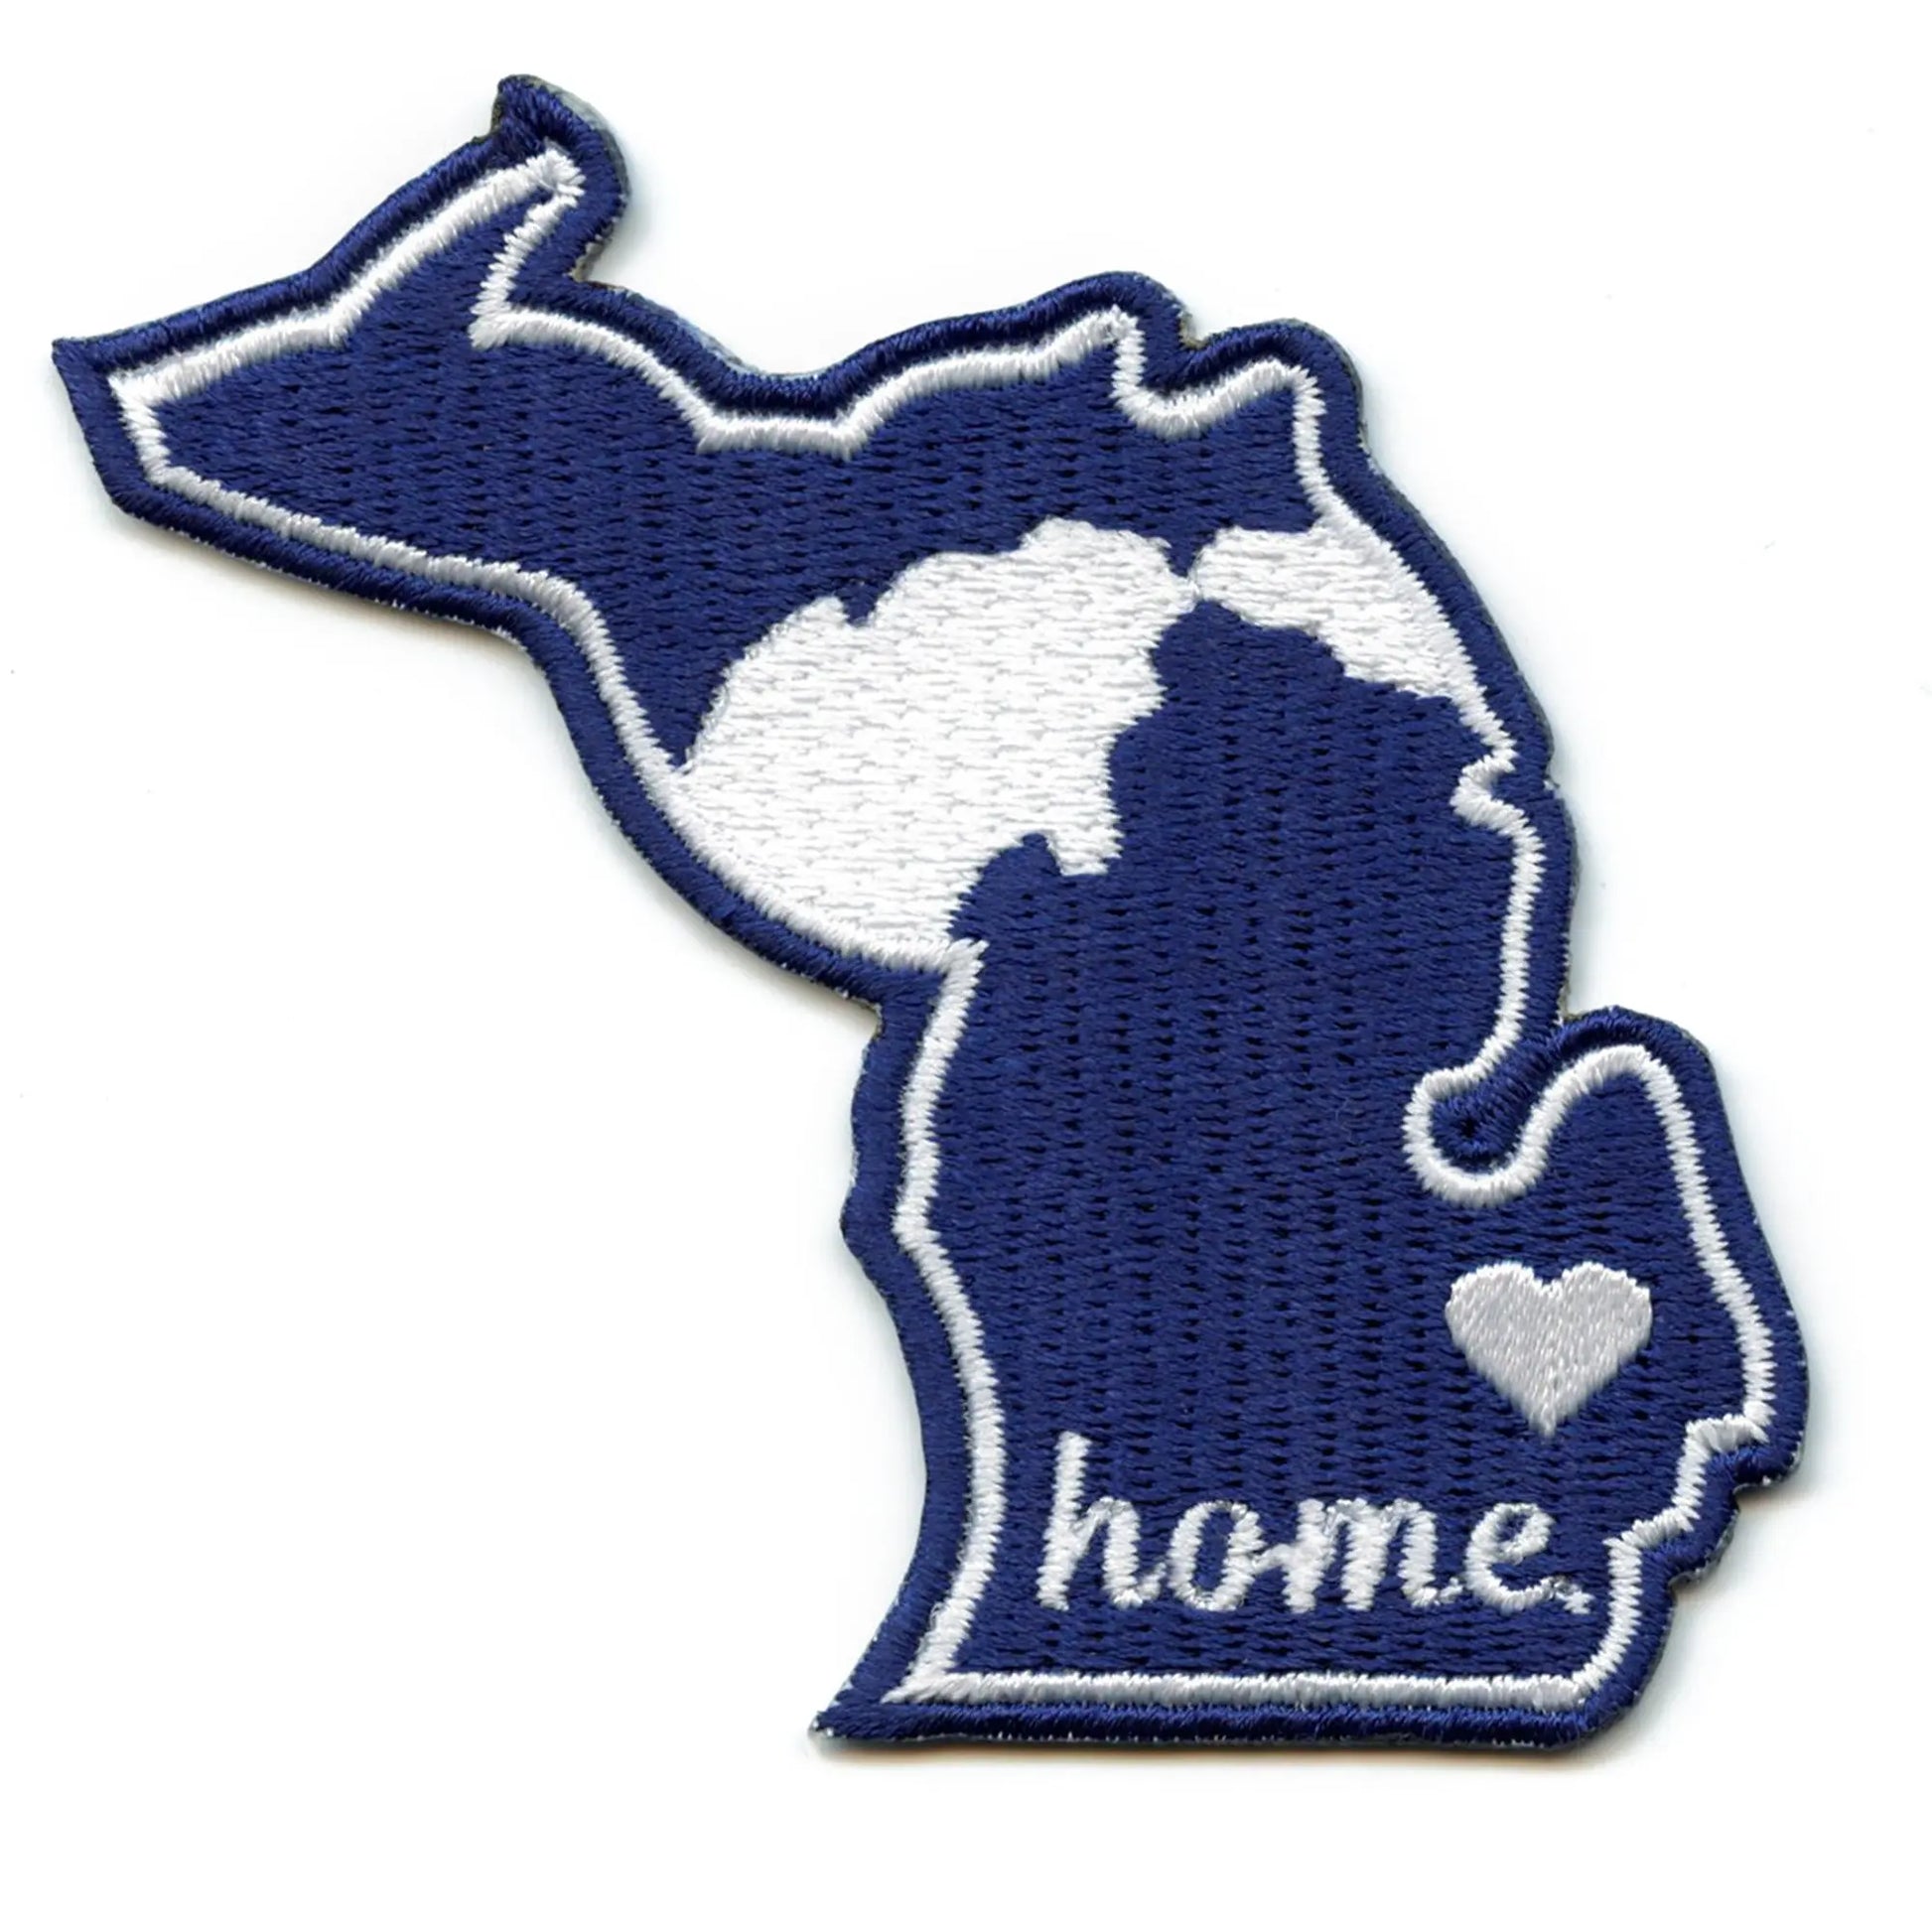 Michigan Home State Patch Baseball Parody Embroidered Iron On - Blue/White 